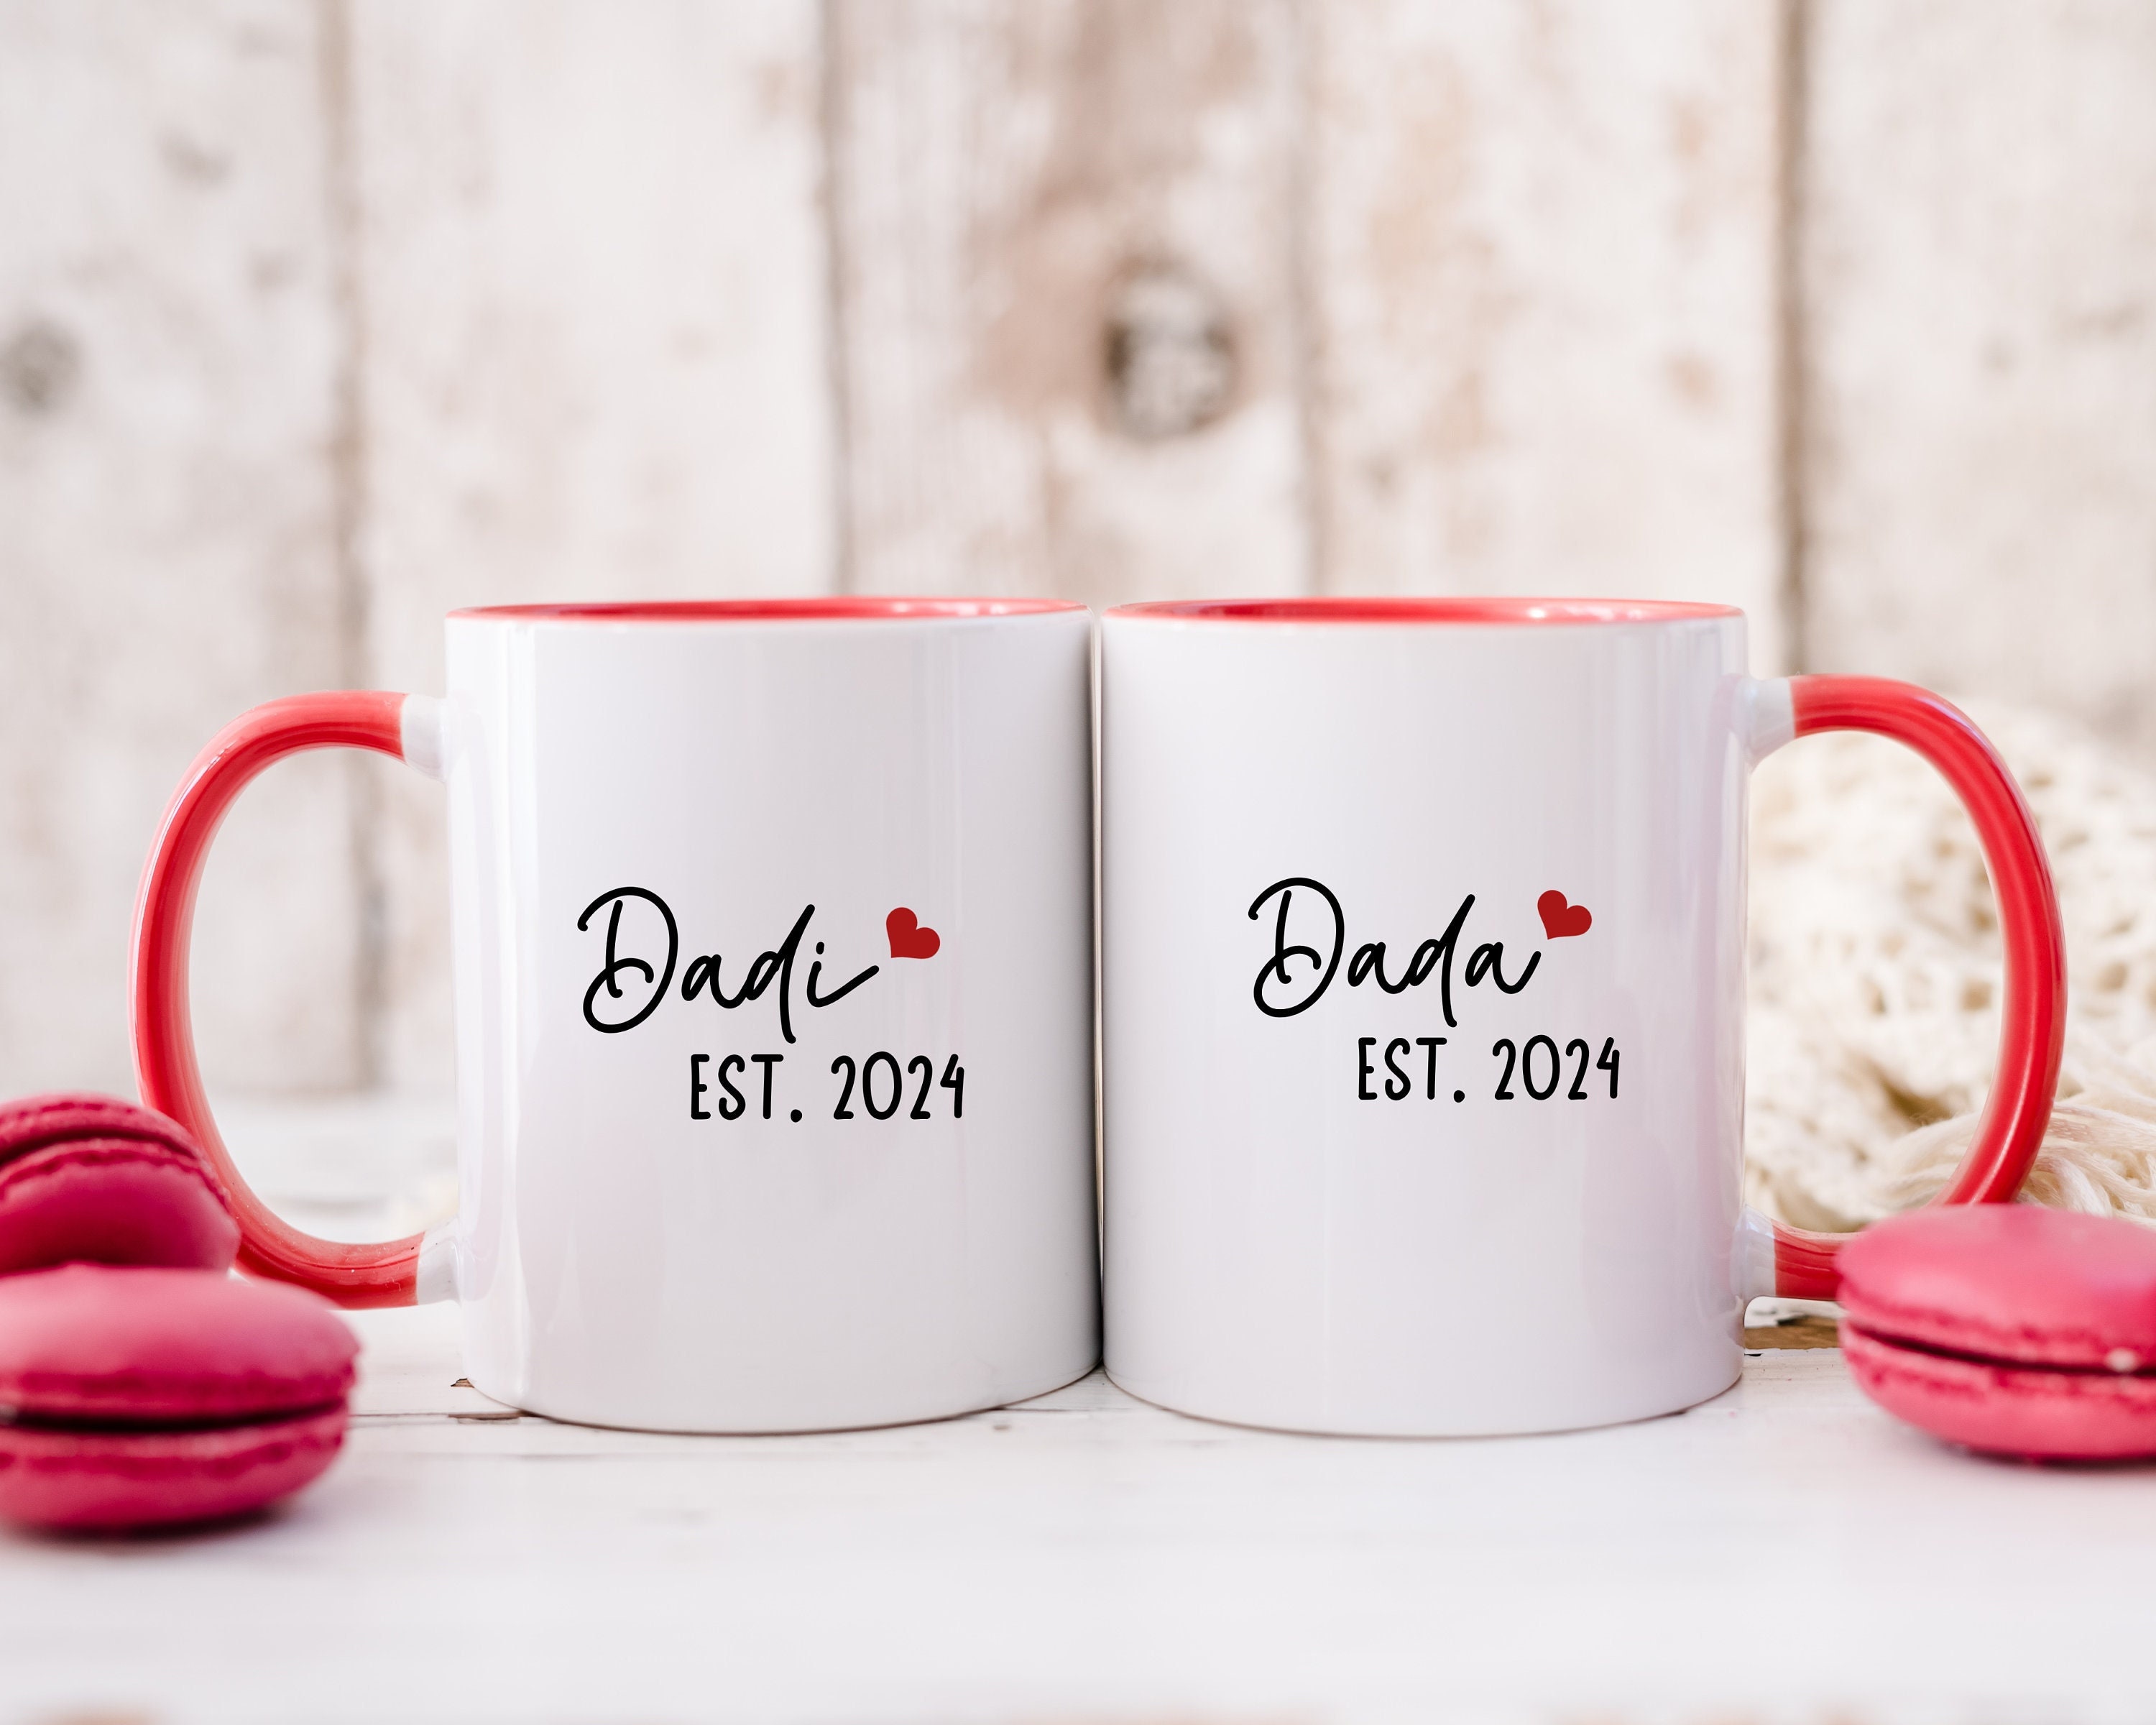 EST 2024 Wifey & Hubby Coffee Mug Set, Unique Coffee Mug Couples Sets Gift  for Engagement Wedding Newly-Married Anniversary, Anniversary Present for